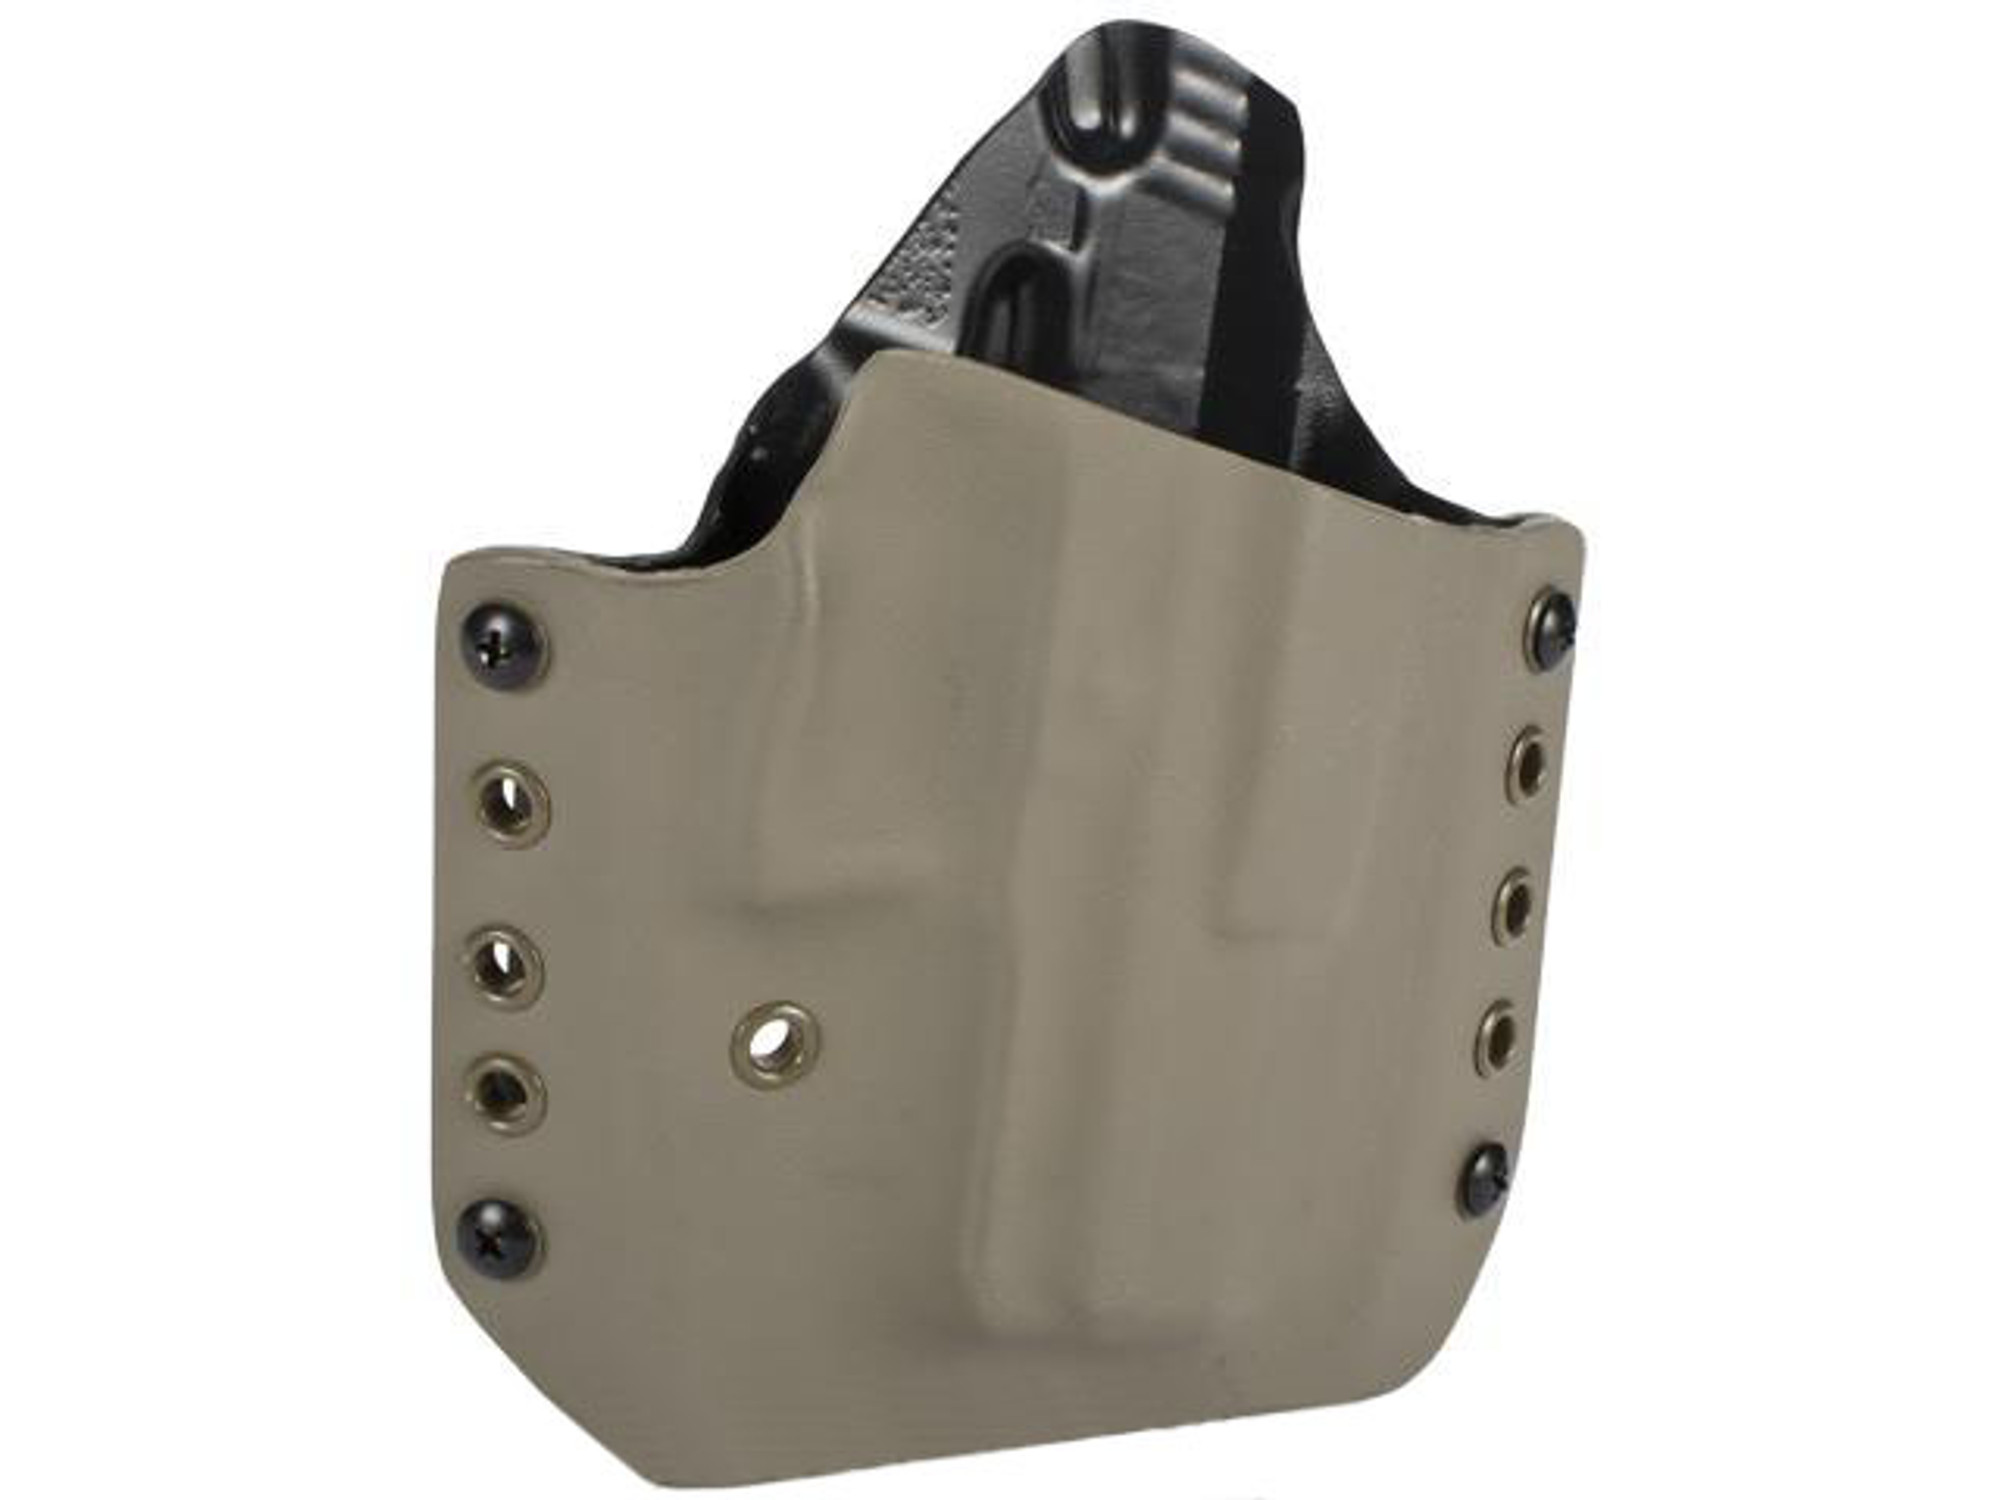 KAOS Concealment Kydex Belt / MOLLE Holster - KWA USP Compact (Right / Dark Earth)